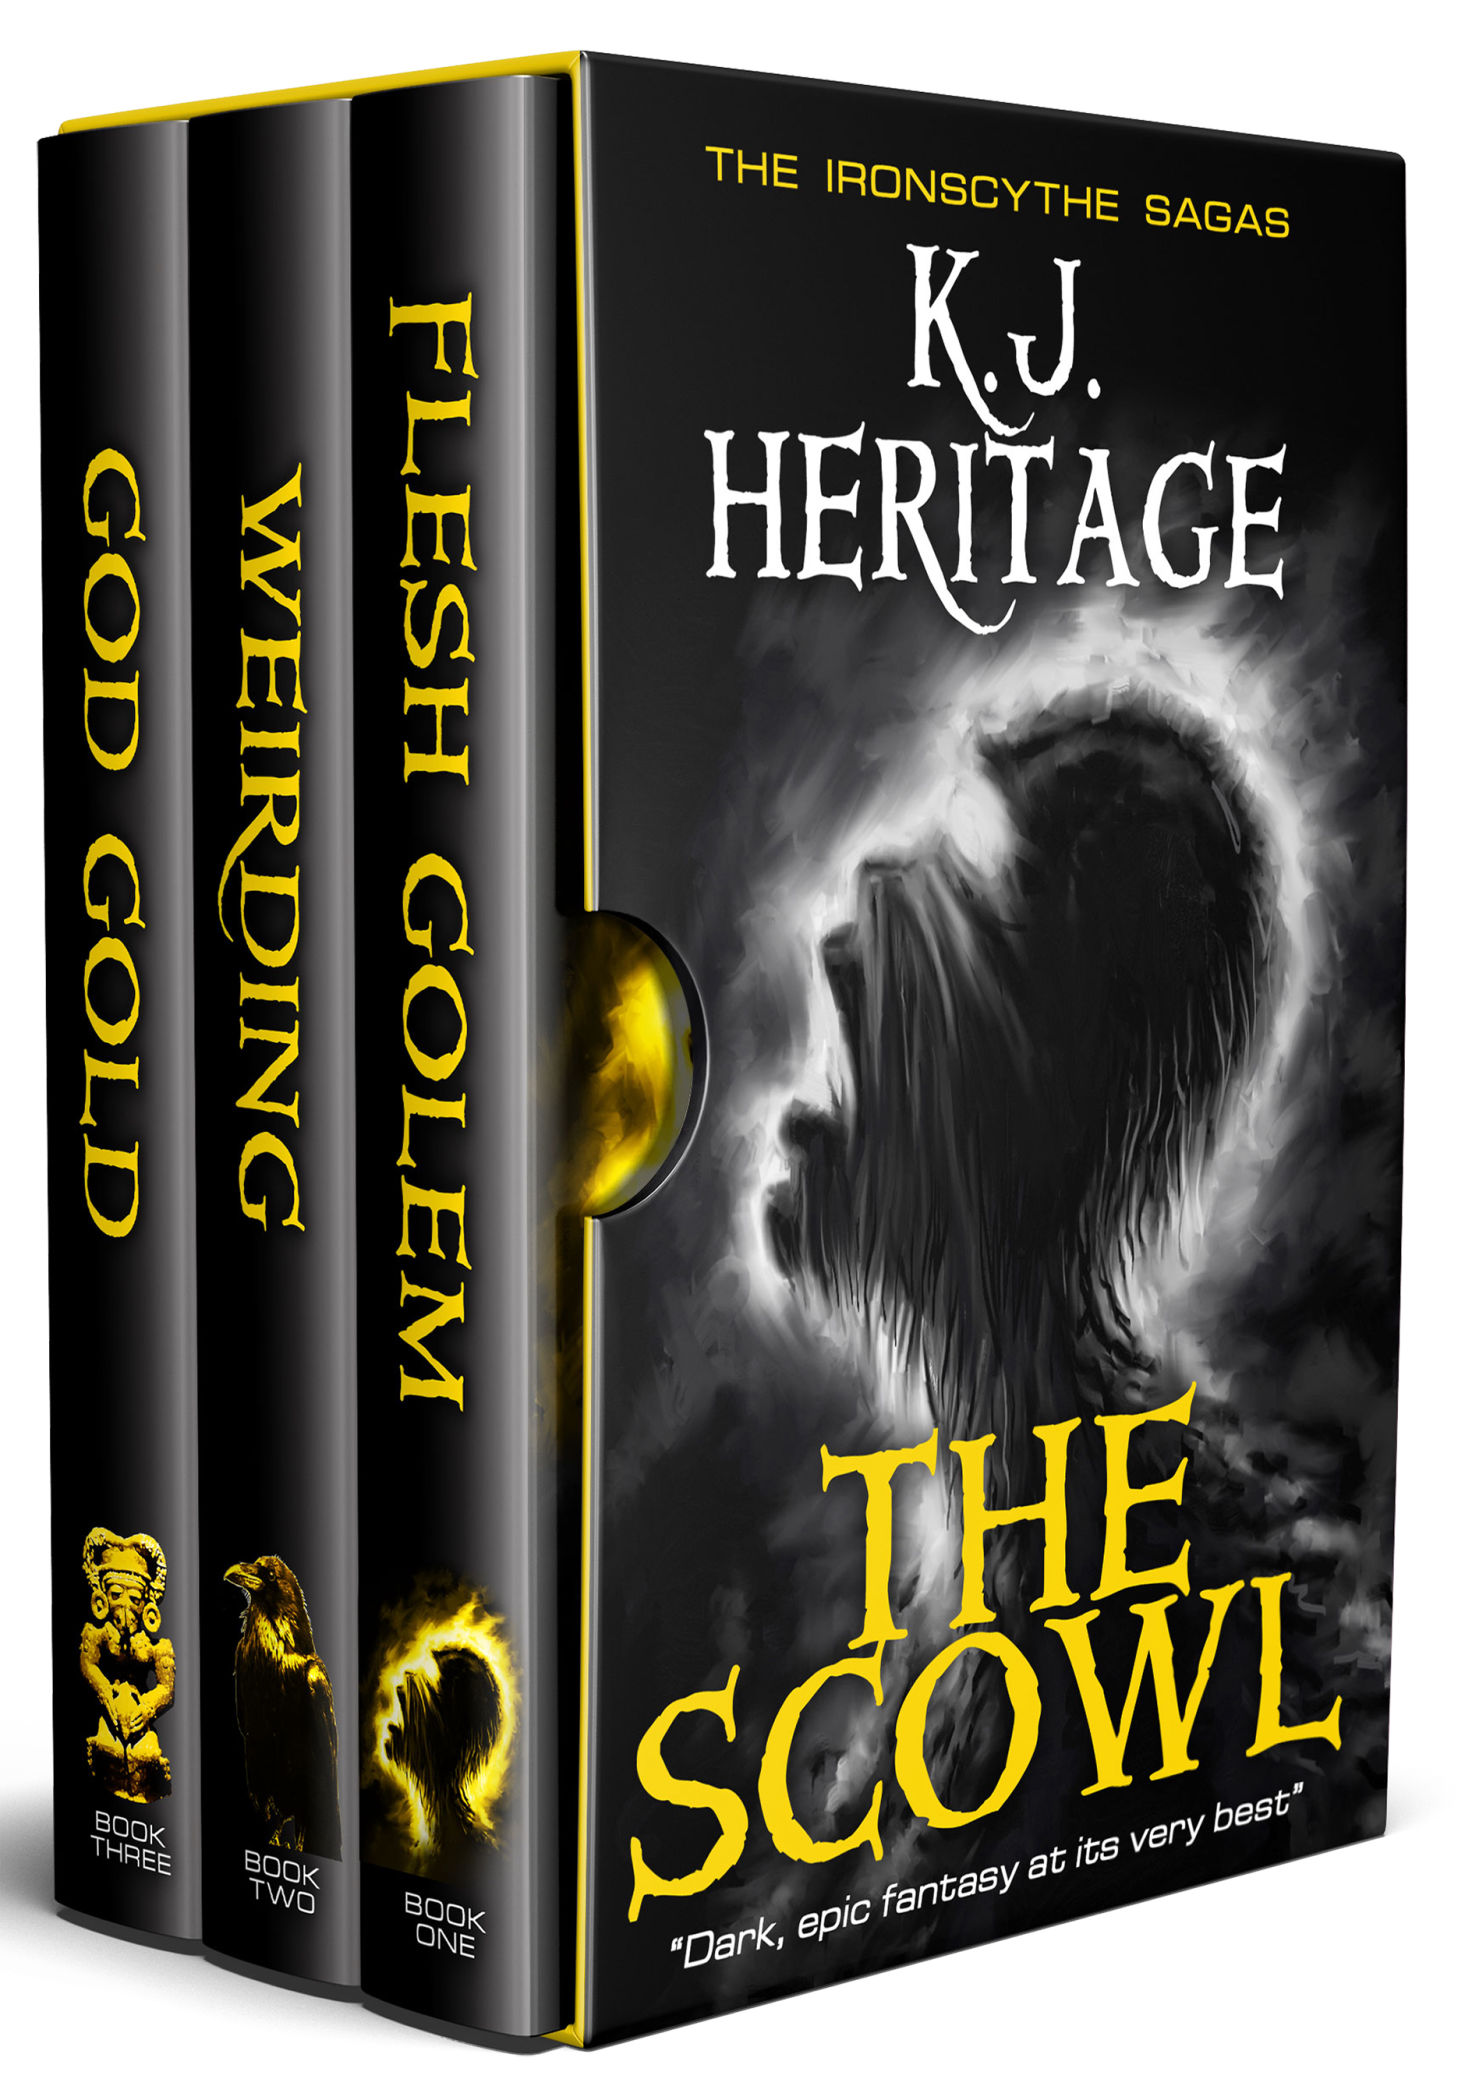 The Scowl by K.J.Heritage